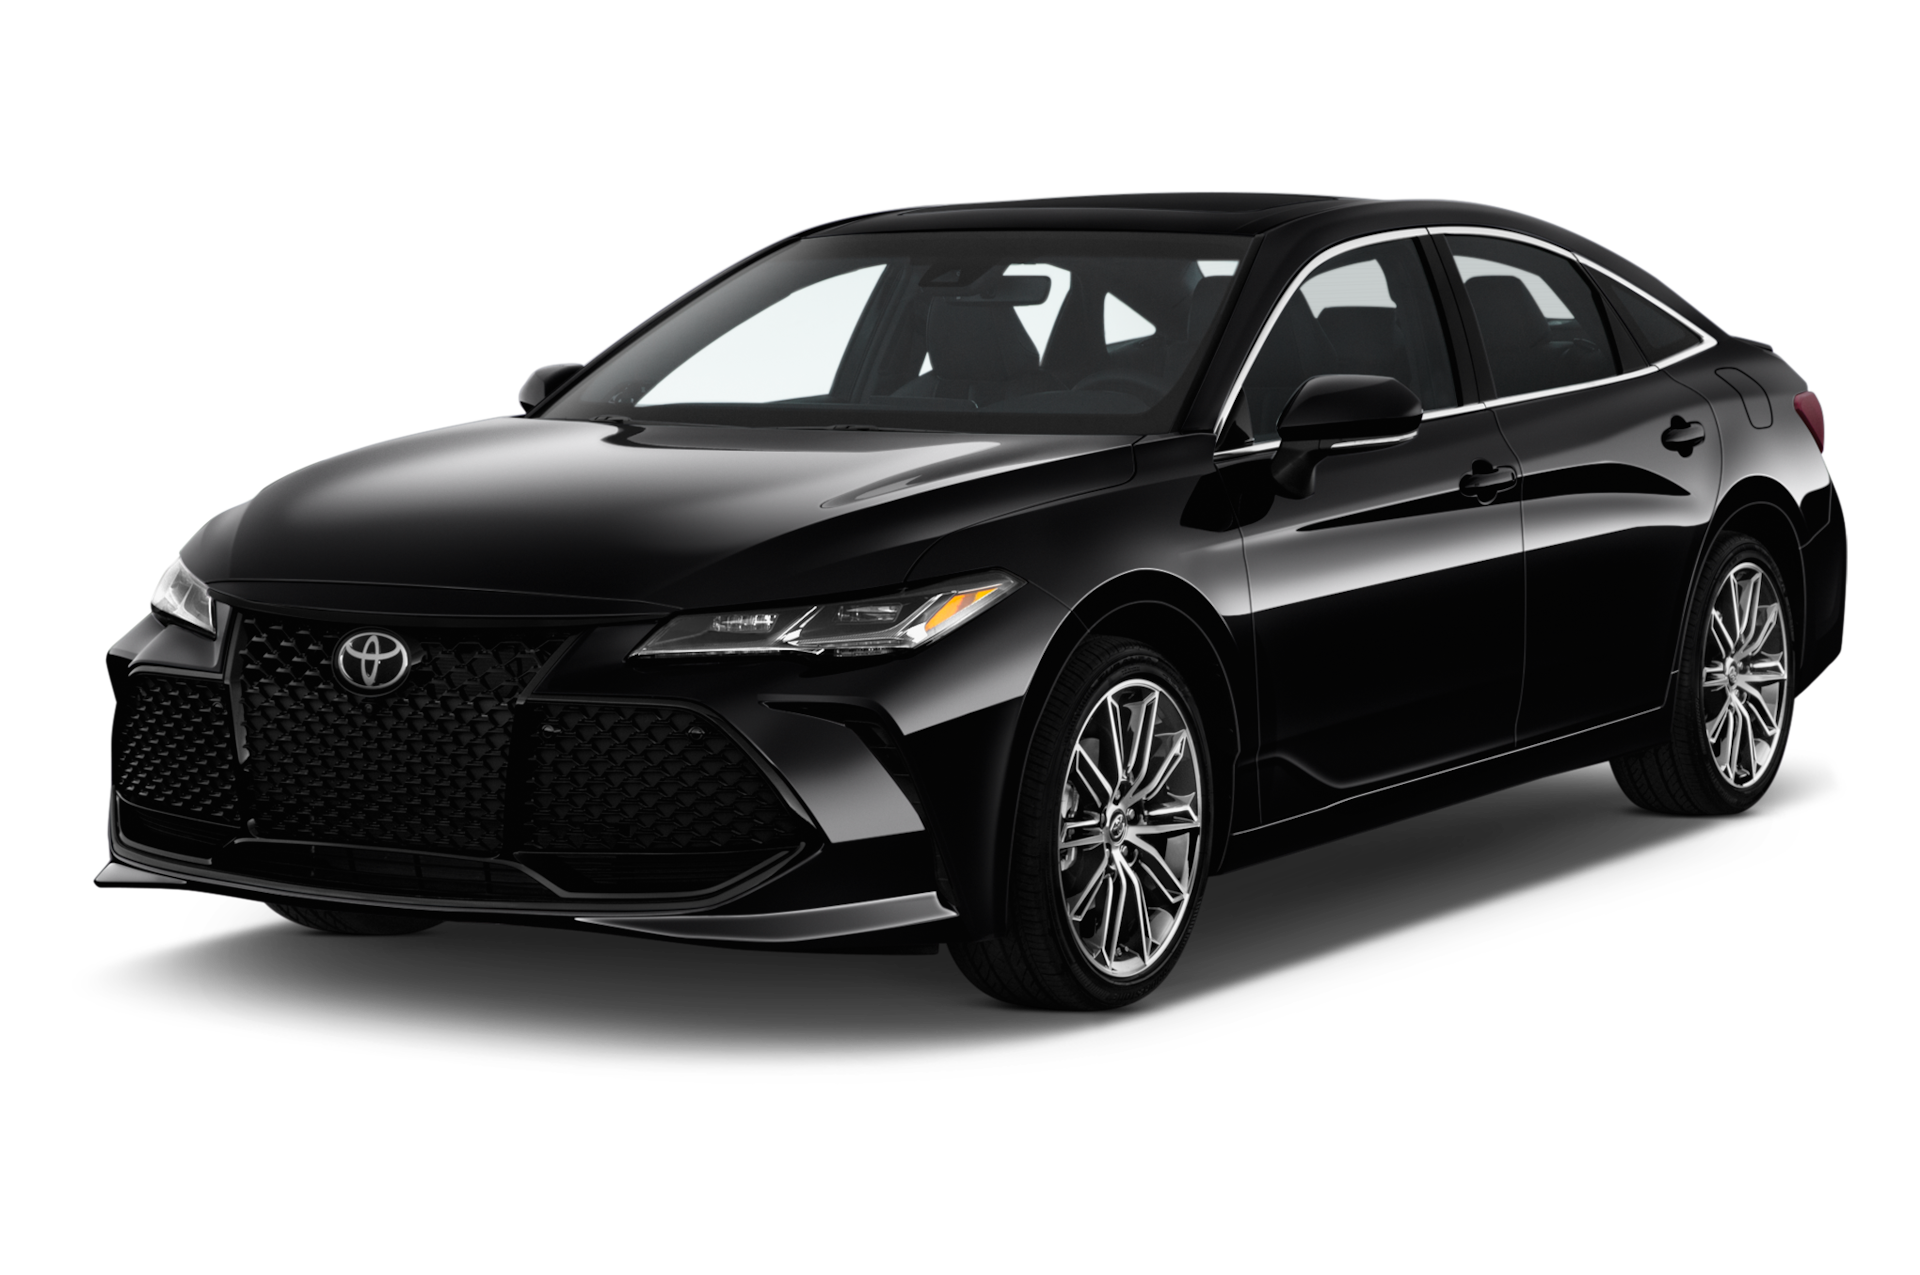 2021 Toyota Avalon Hybrid Prices, Reviews, and Photos - MotorTrend